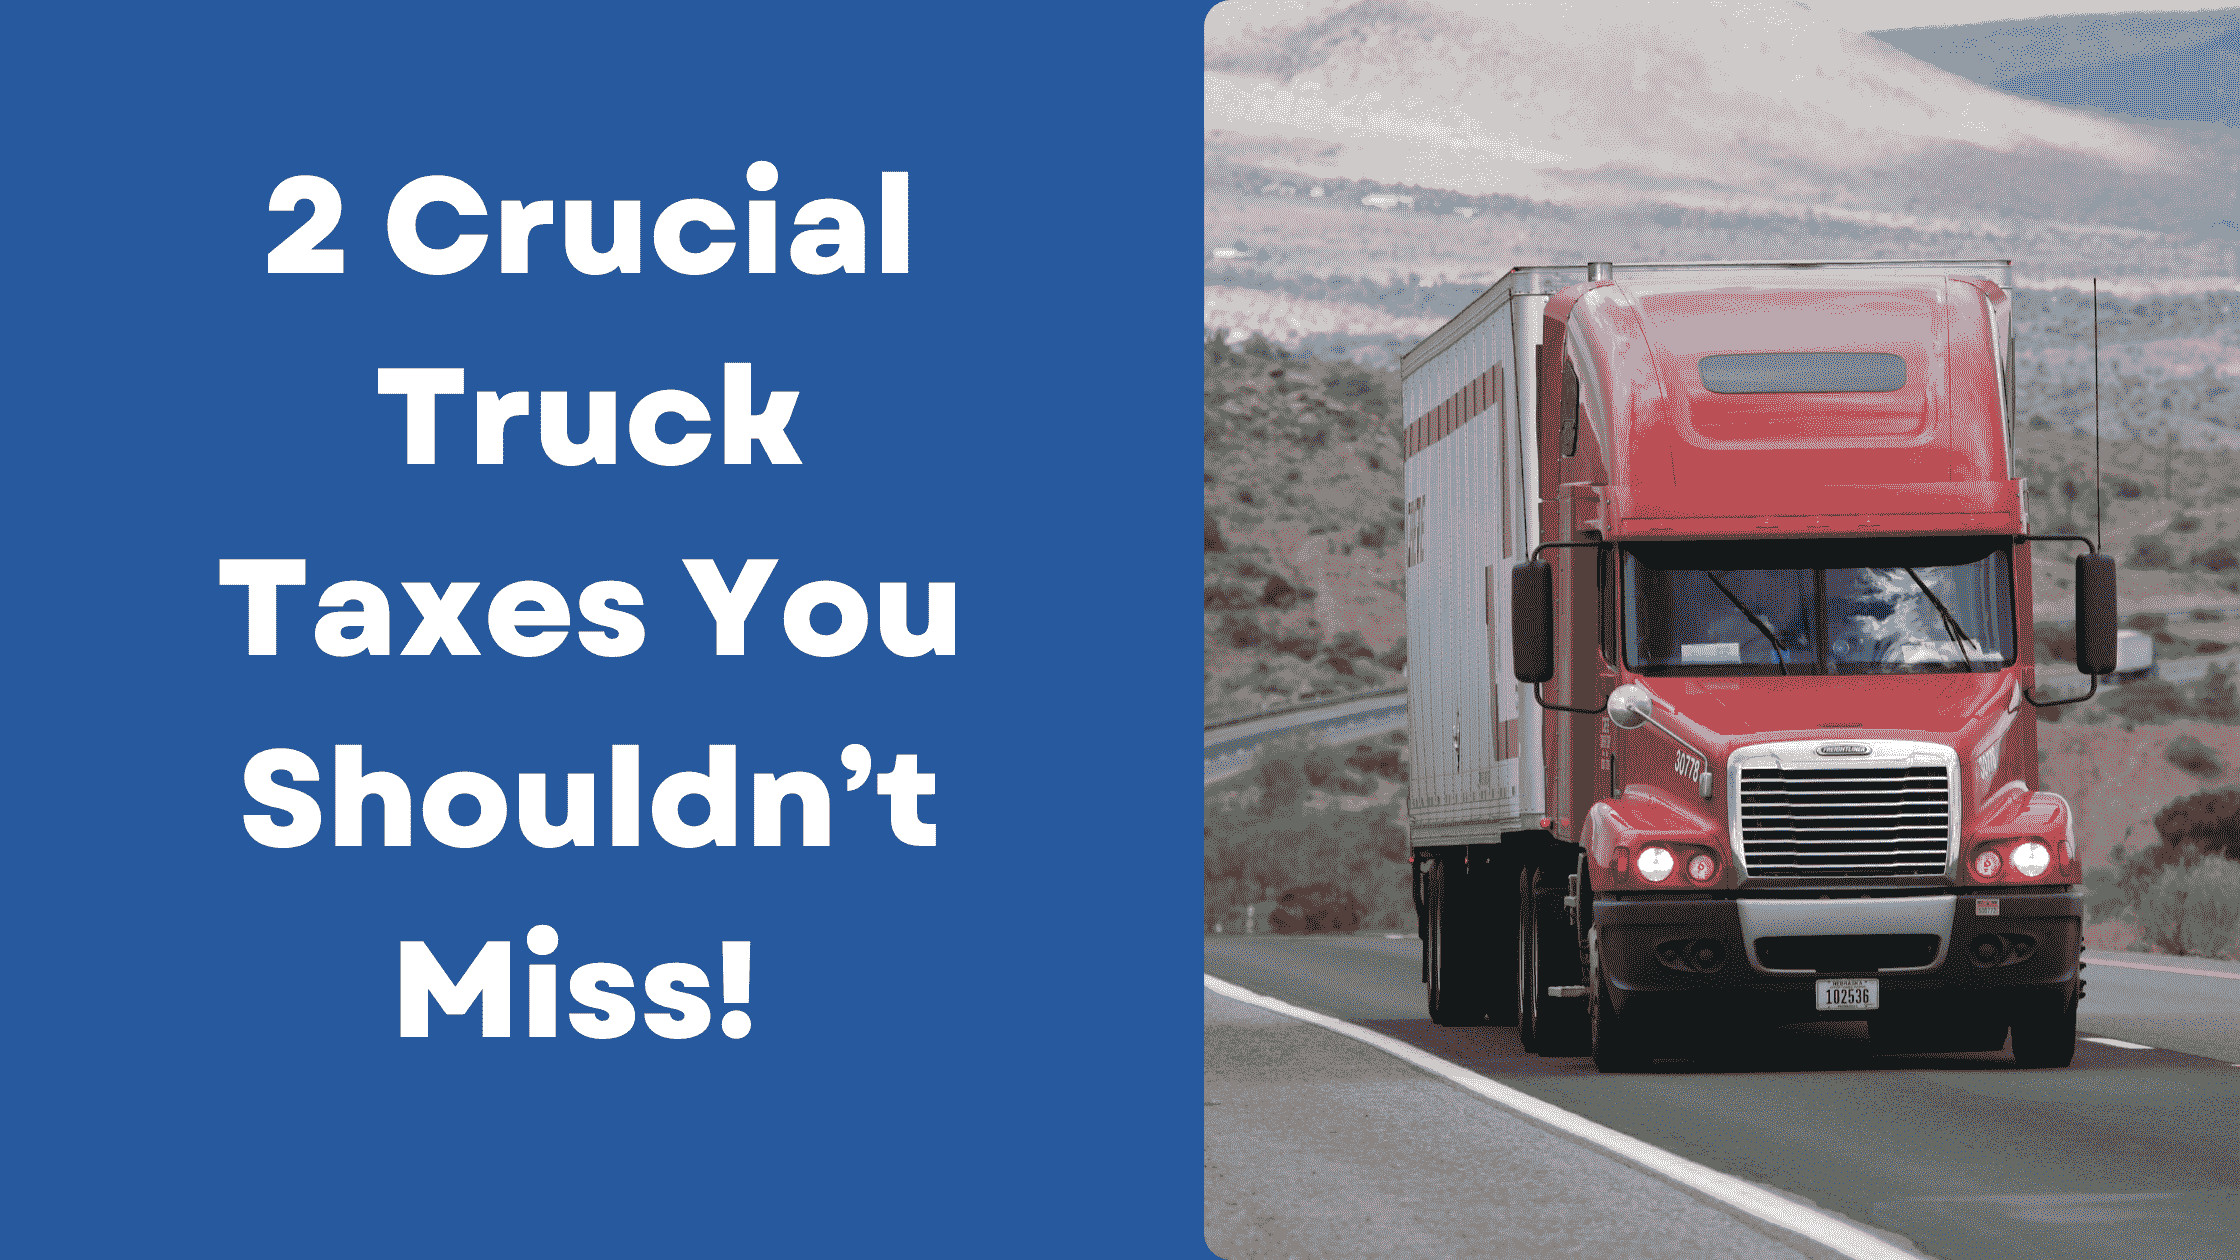 2 Crucial Truck Taxes You Shouldn’t Miss! 